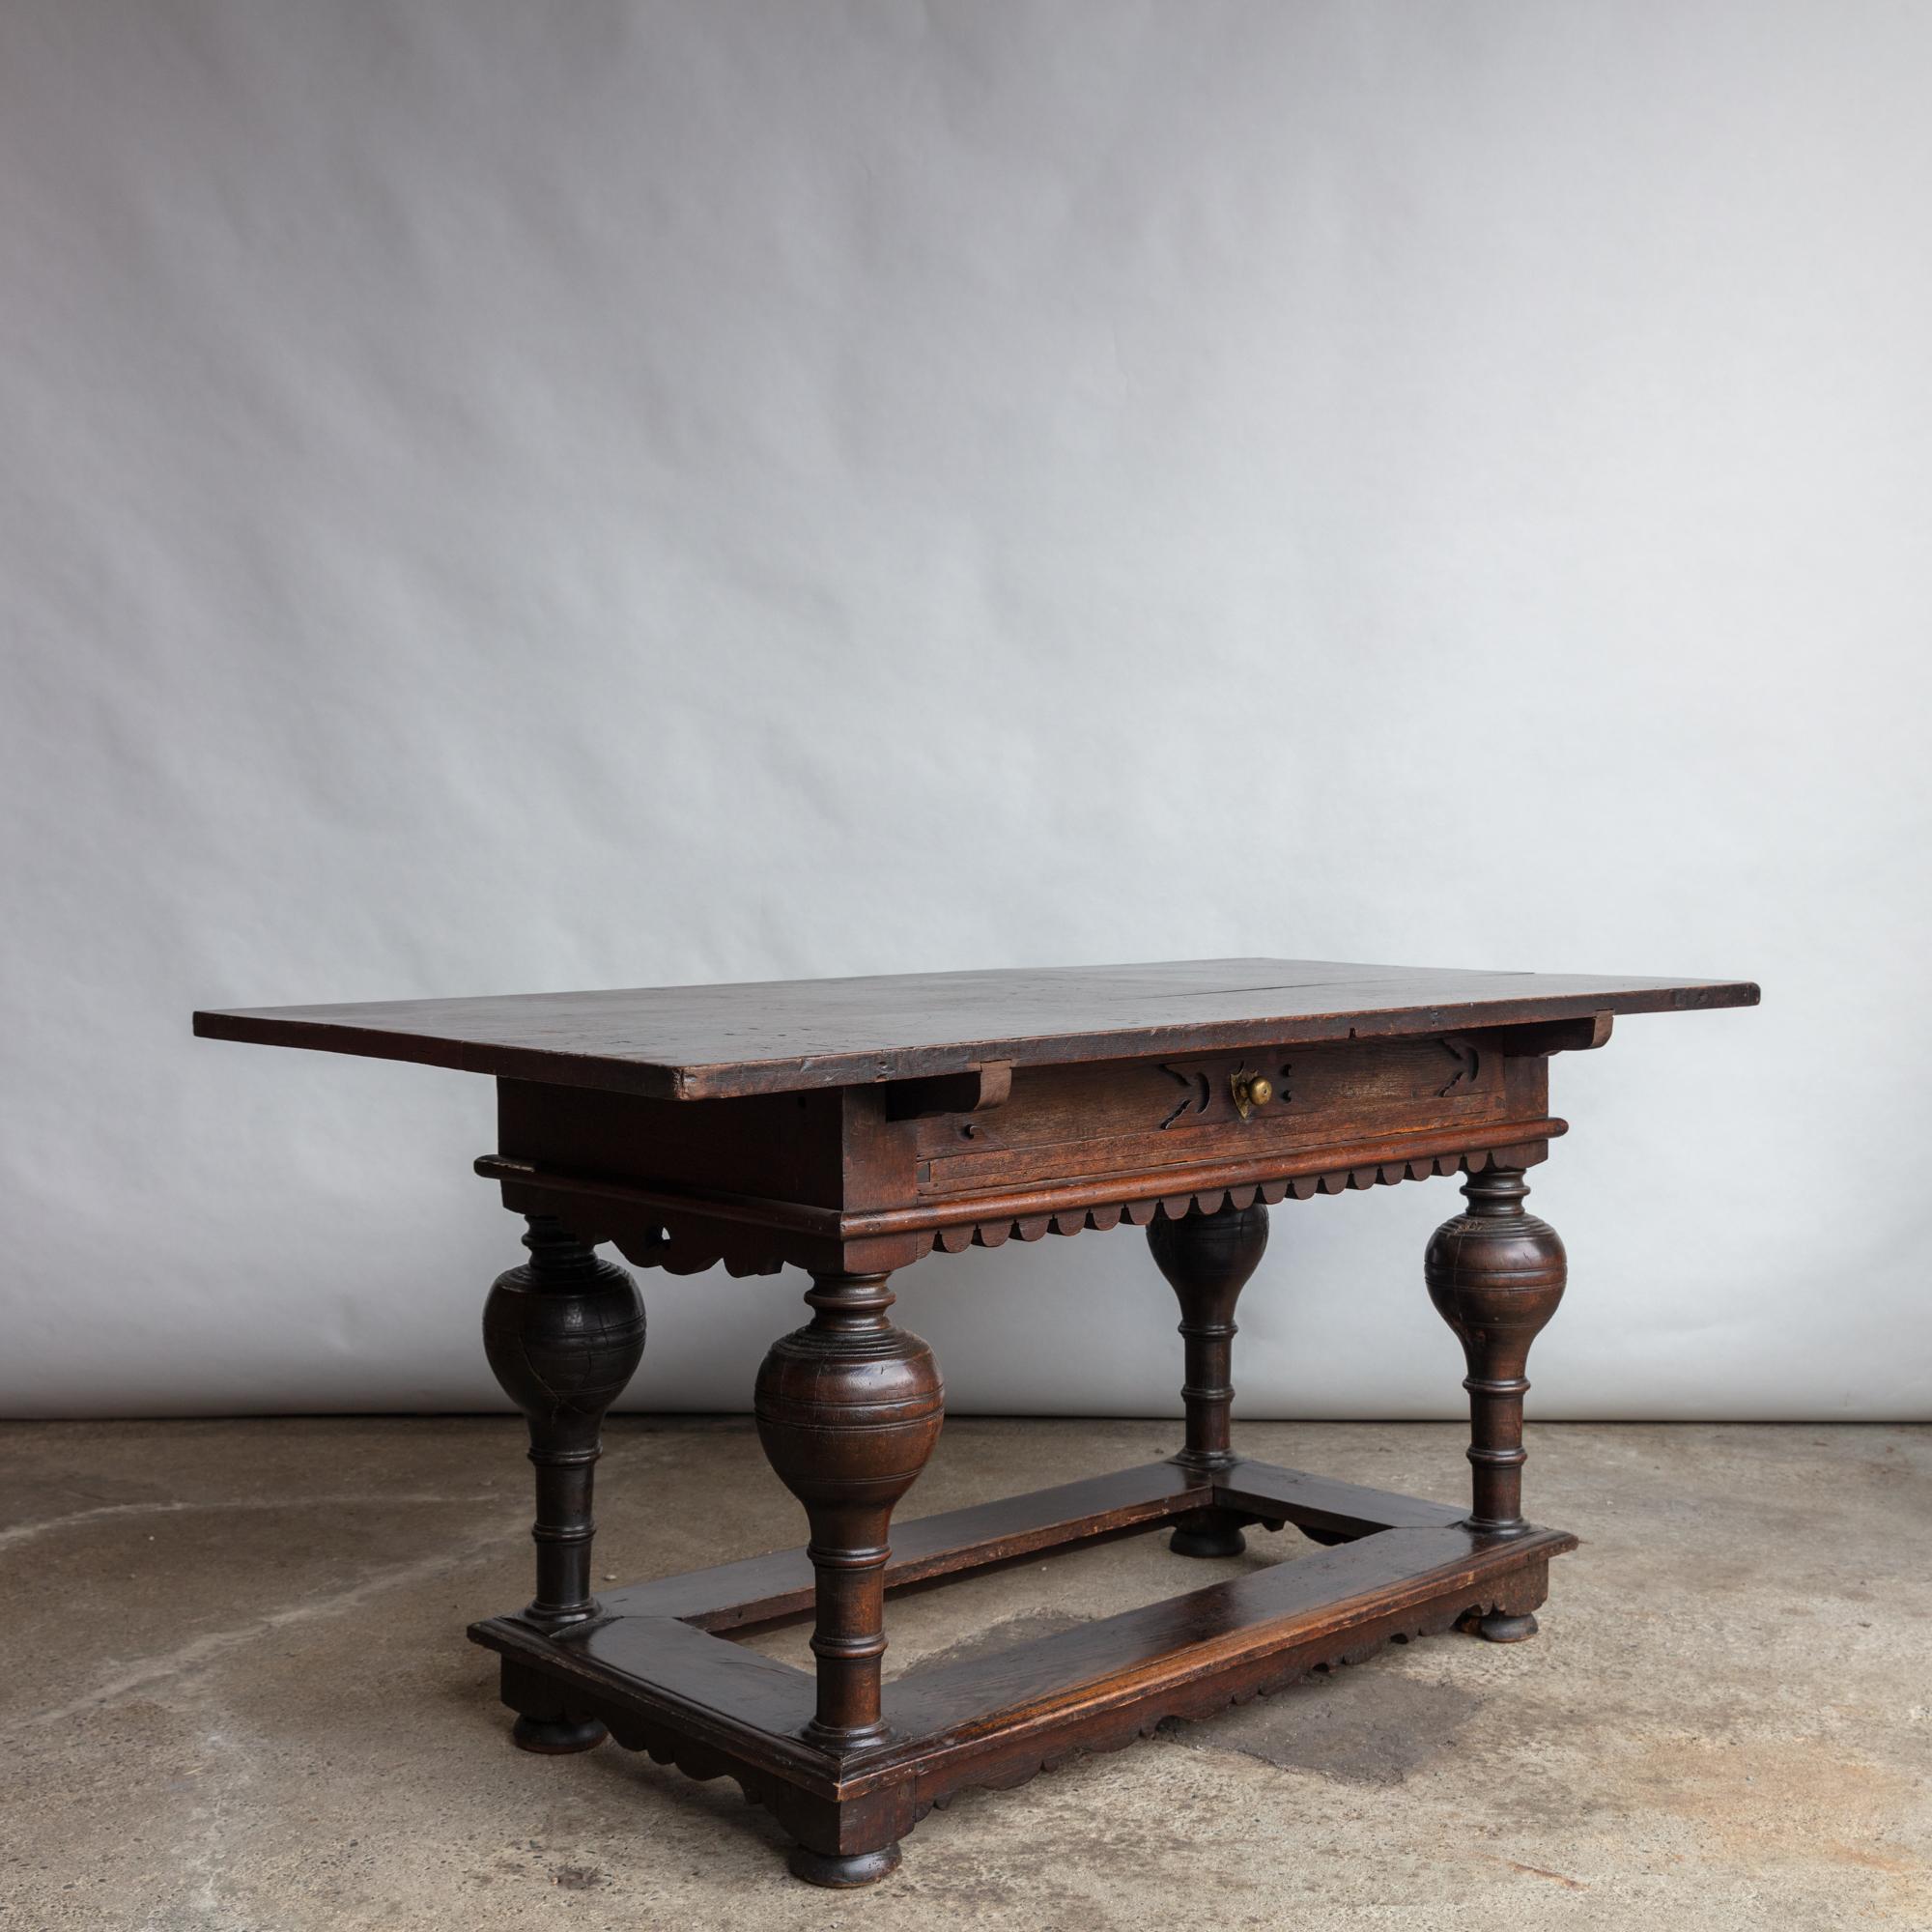 Antique carved wooden table with beautiful, original patina. In excellent condition.